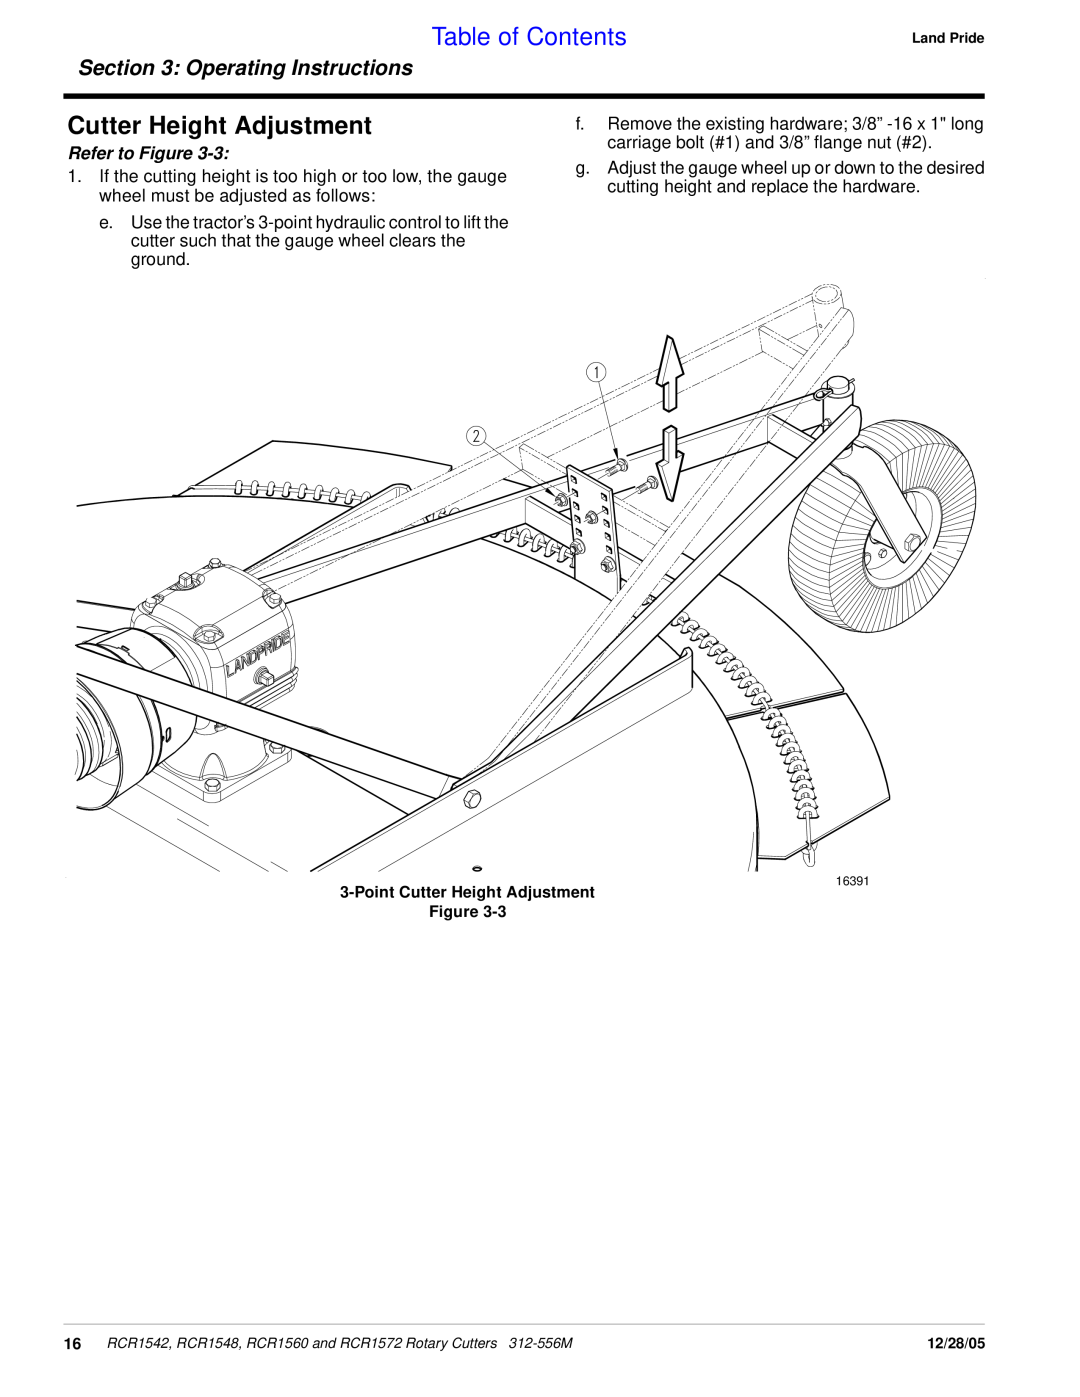 Land Pride RCR1542, RCR1560, RCR1572 Cutter Height Adjustment, Table of Contents, Operating Instructions, Refer to Figure 